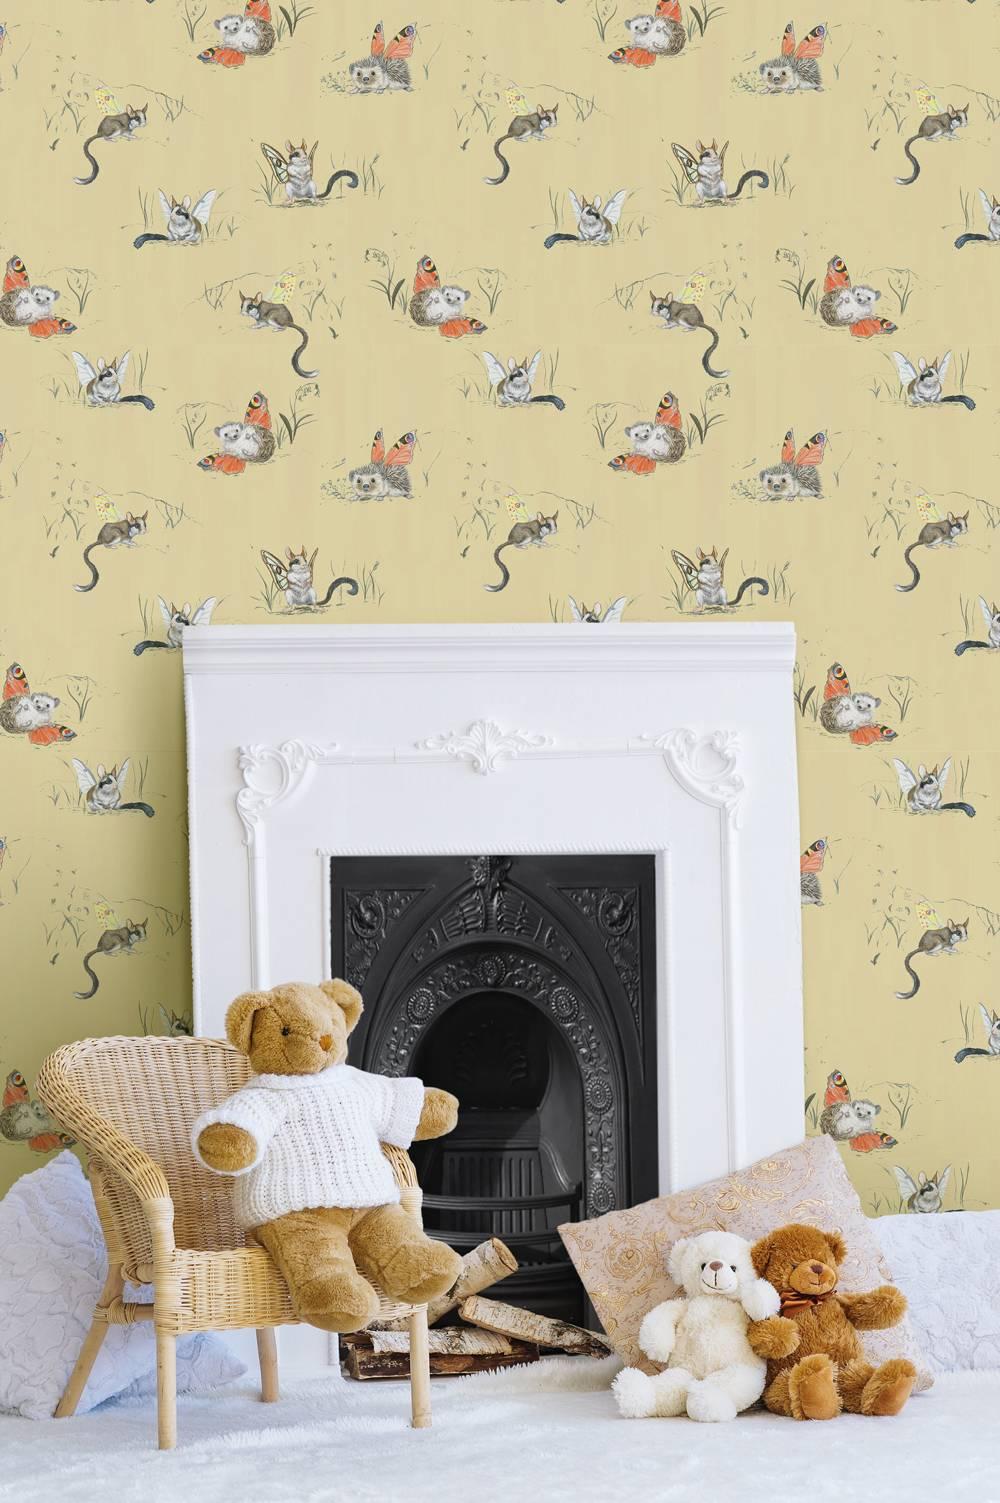 Winged hedgehog and dormouse wallpaper is created By Frederick Wimsett for Flat Space Design. 

This is from the for the very young collection.

Available in five different colors.

£80 pounds per linear metre. Min order 5 liner metres.